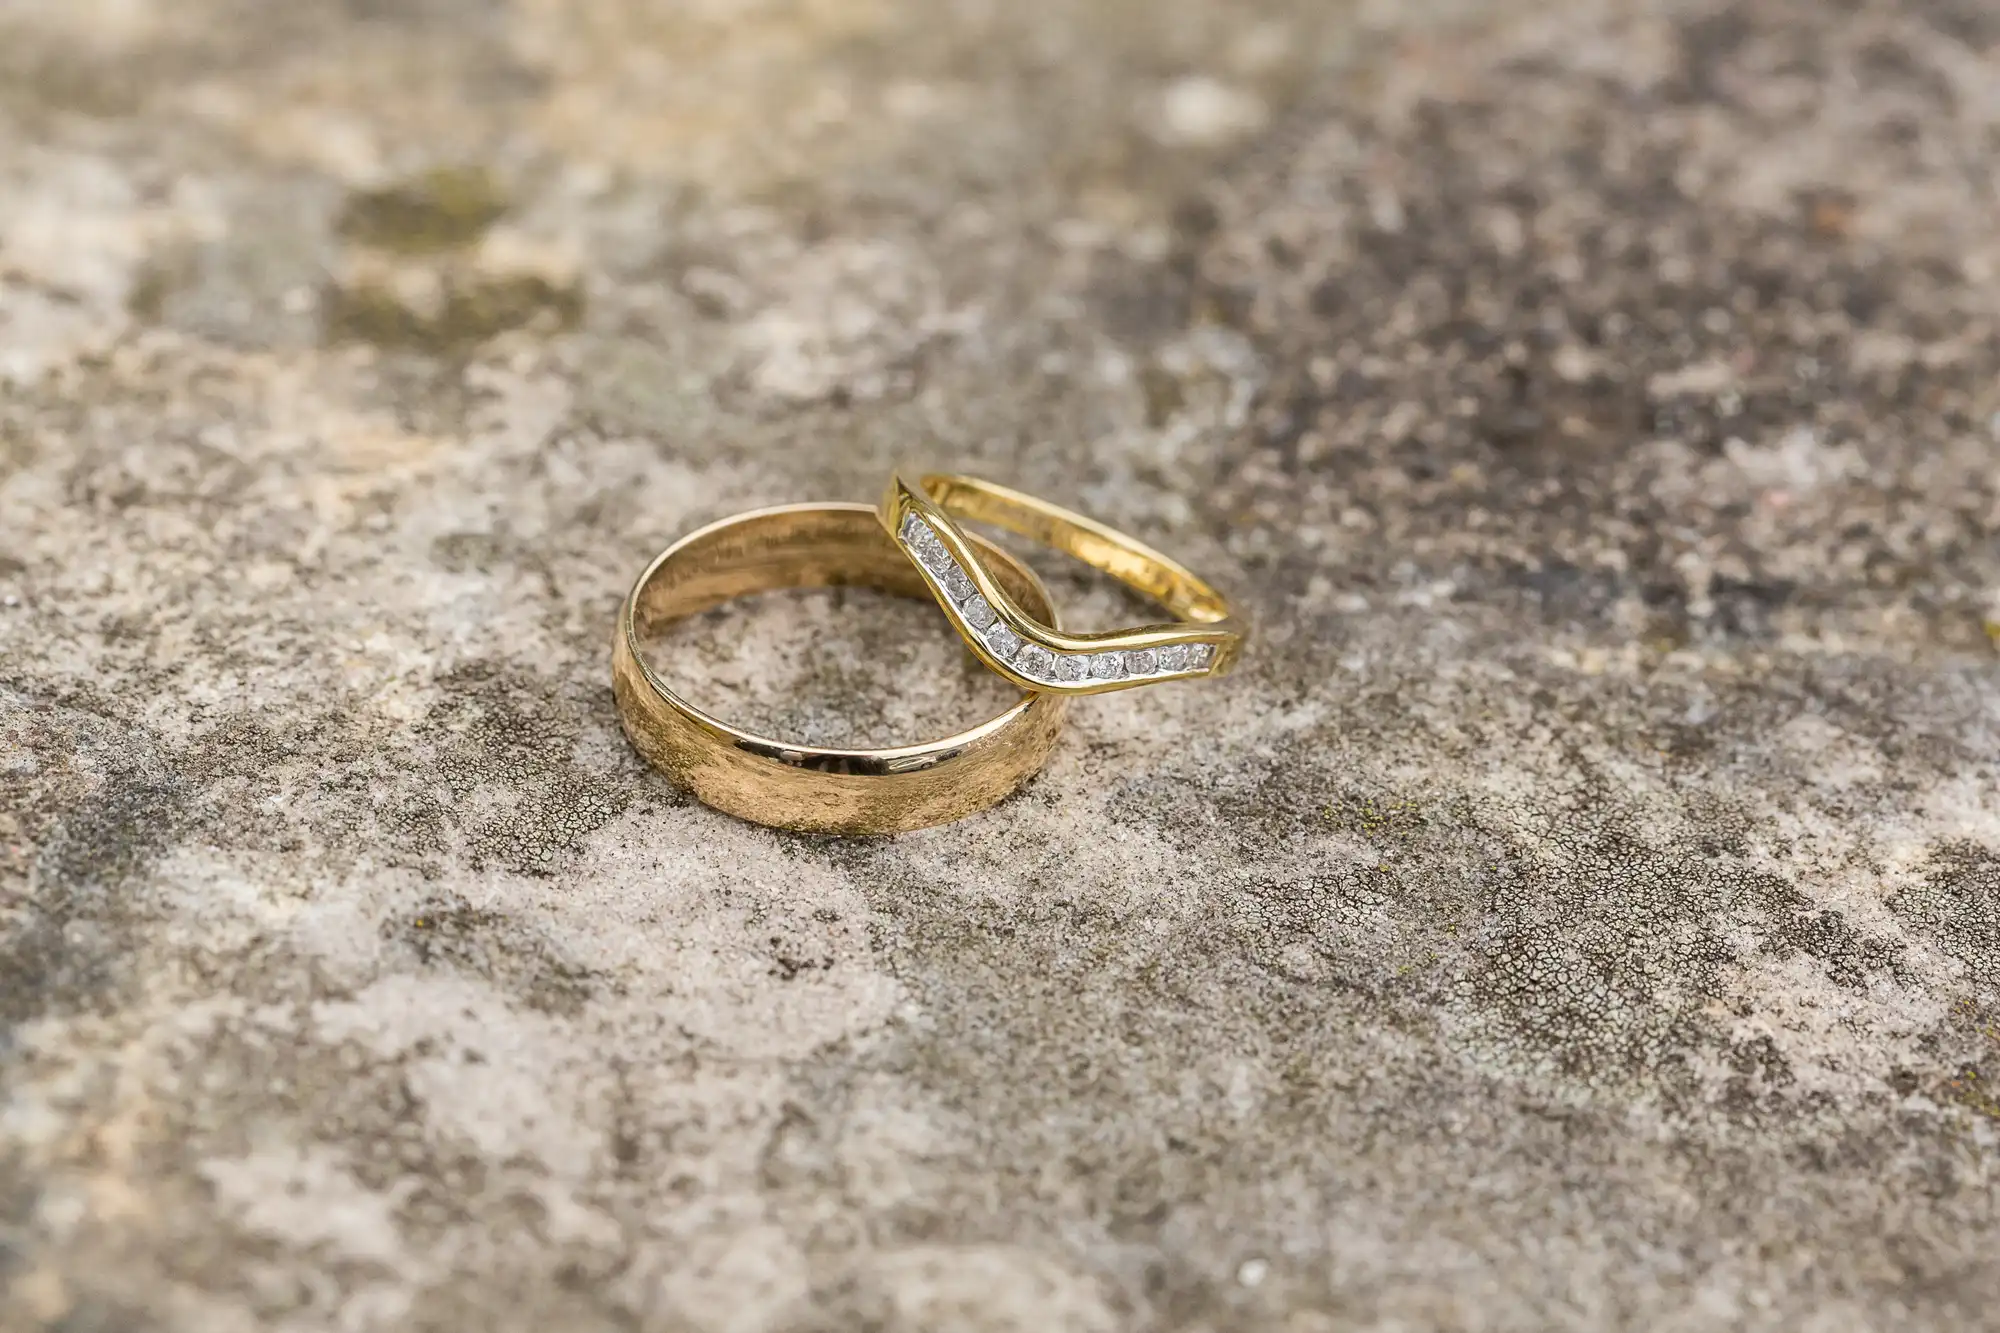 Two wedding rings, one plain gold and one gold with diamonds, resting on a textured stone surface.